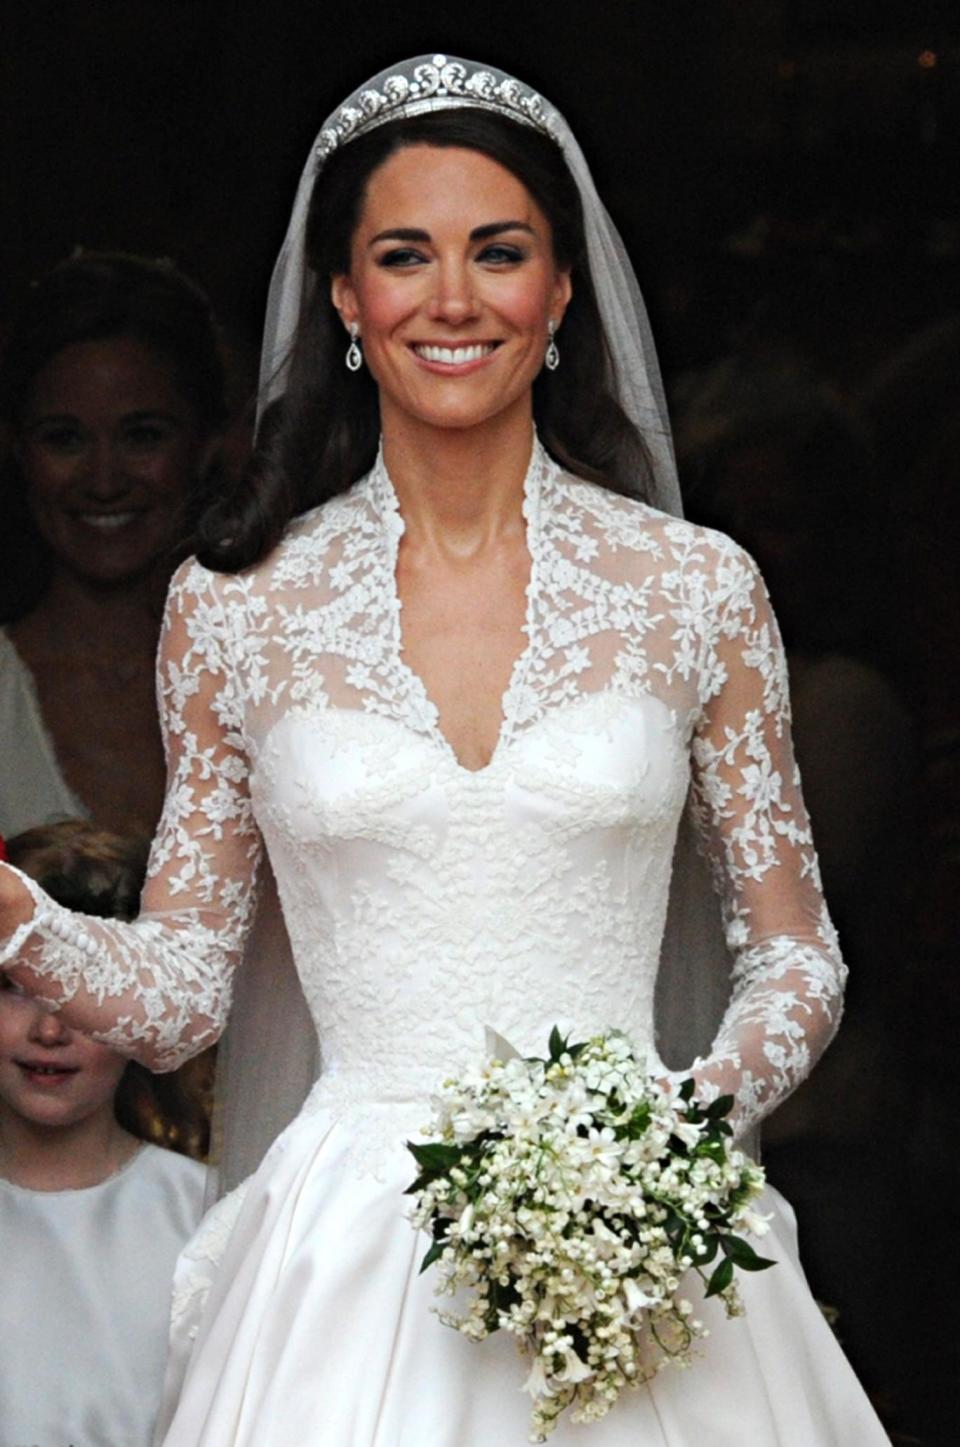 Kate Middleton wears the Cartier Halo Tiara on her wedding day in 2011 (AFP/Getty Images)